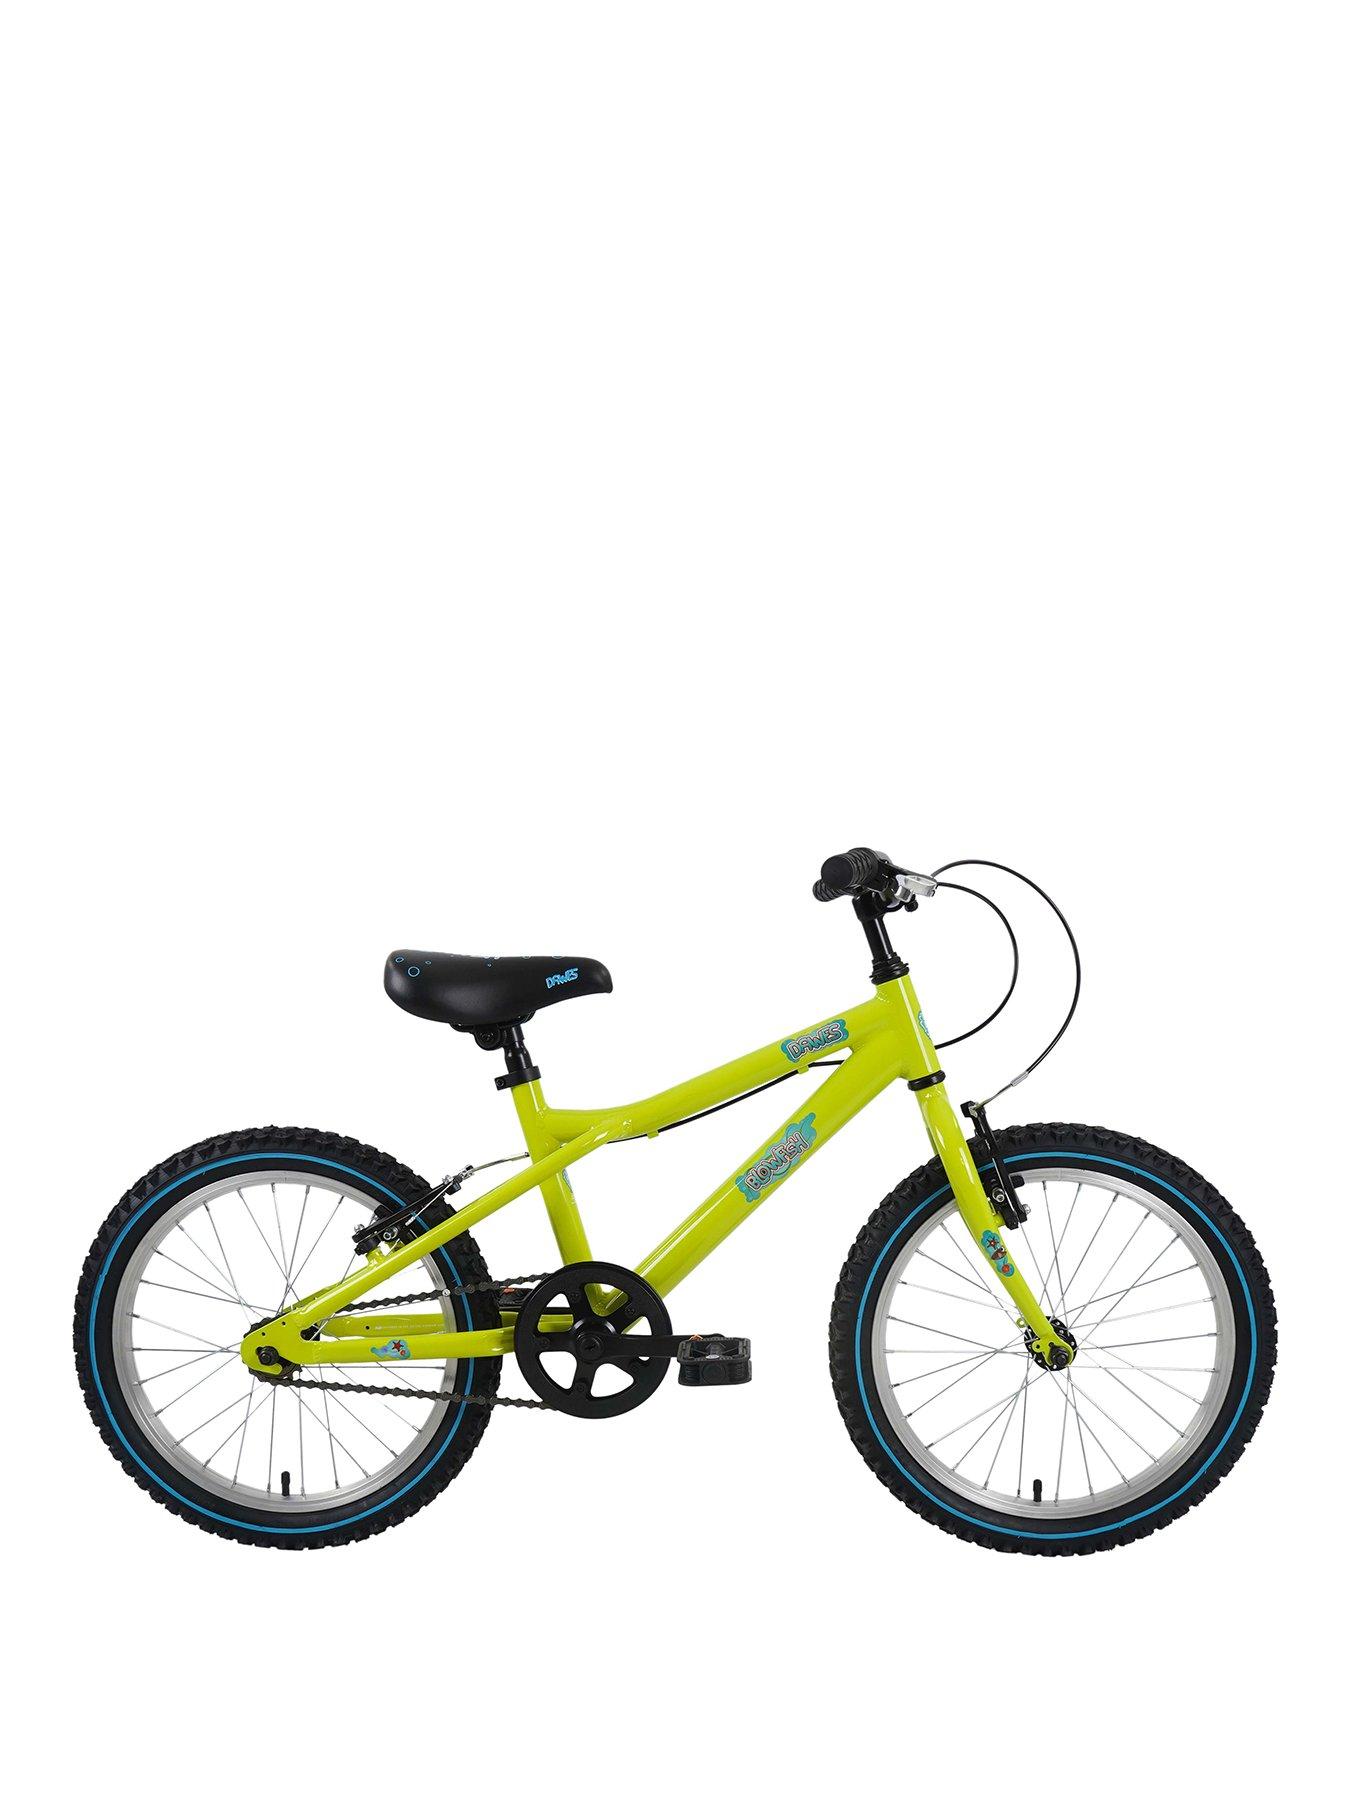 Freestyle Kids Bike Double Disc Brakes 26 Children's Bicycle For Boys —  Brother's Outlet